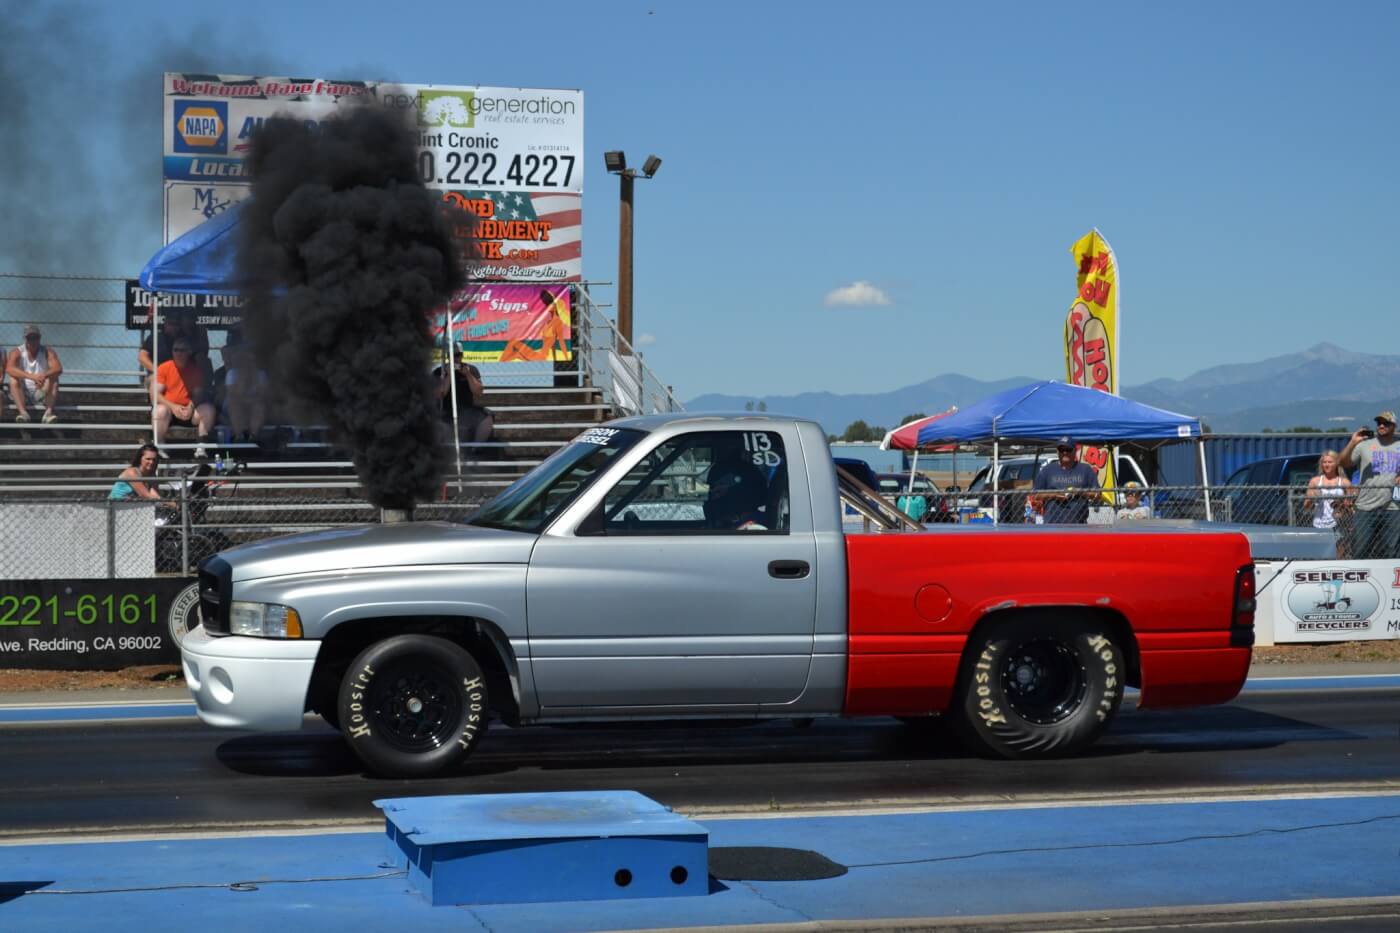 Diesels usually have a heck of a time making full passes the first time to the track, but Aaron Flournoy was able to dip into the 10-second zone the first time out, with his 12-valve powered drag truck. With a best of 10.87 at 126 mph with a spinning 1.74 60ft, look for this Ram to dip into the 9s soon.